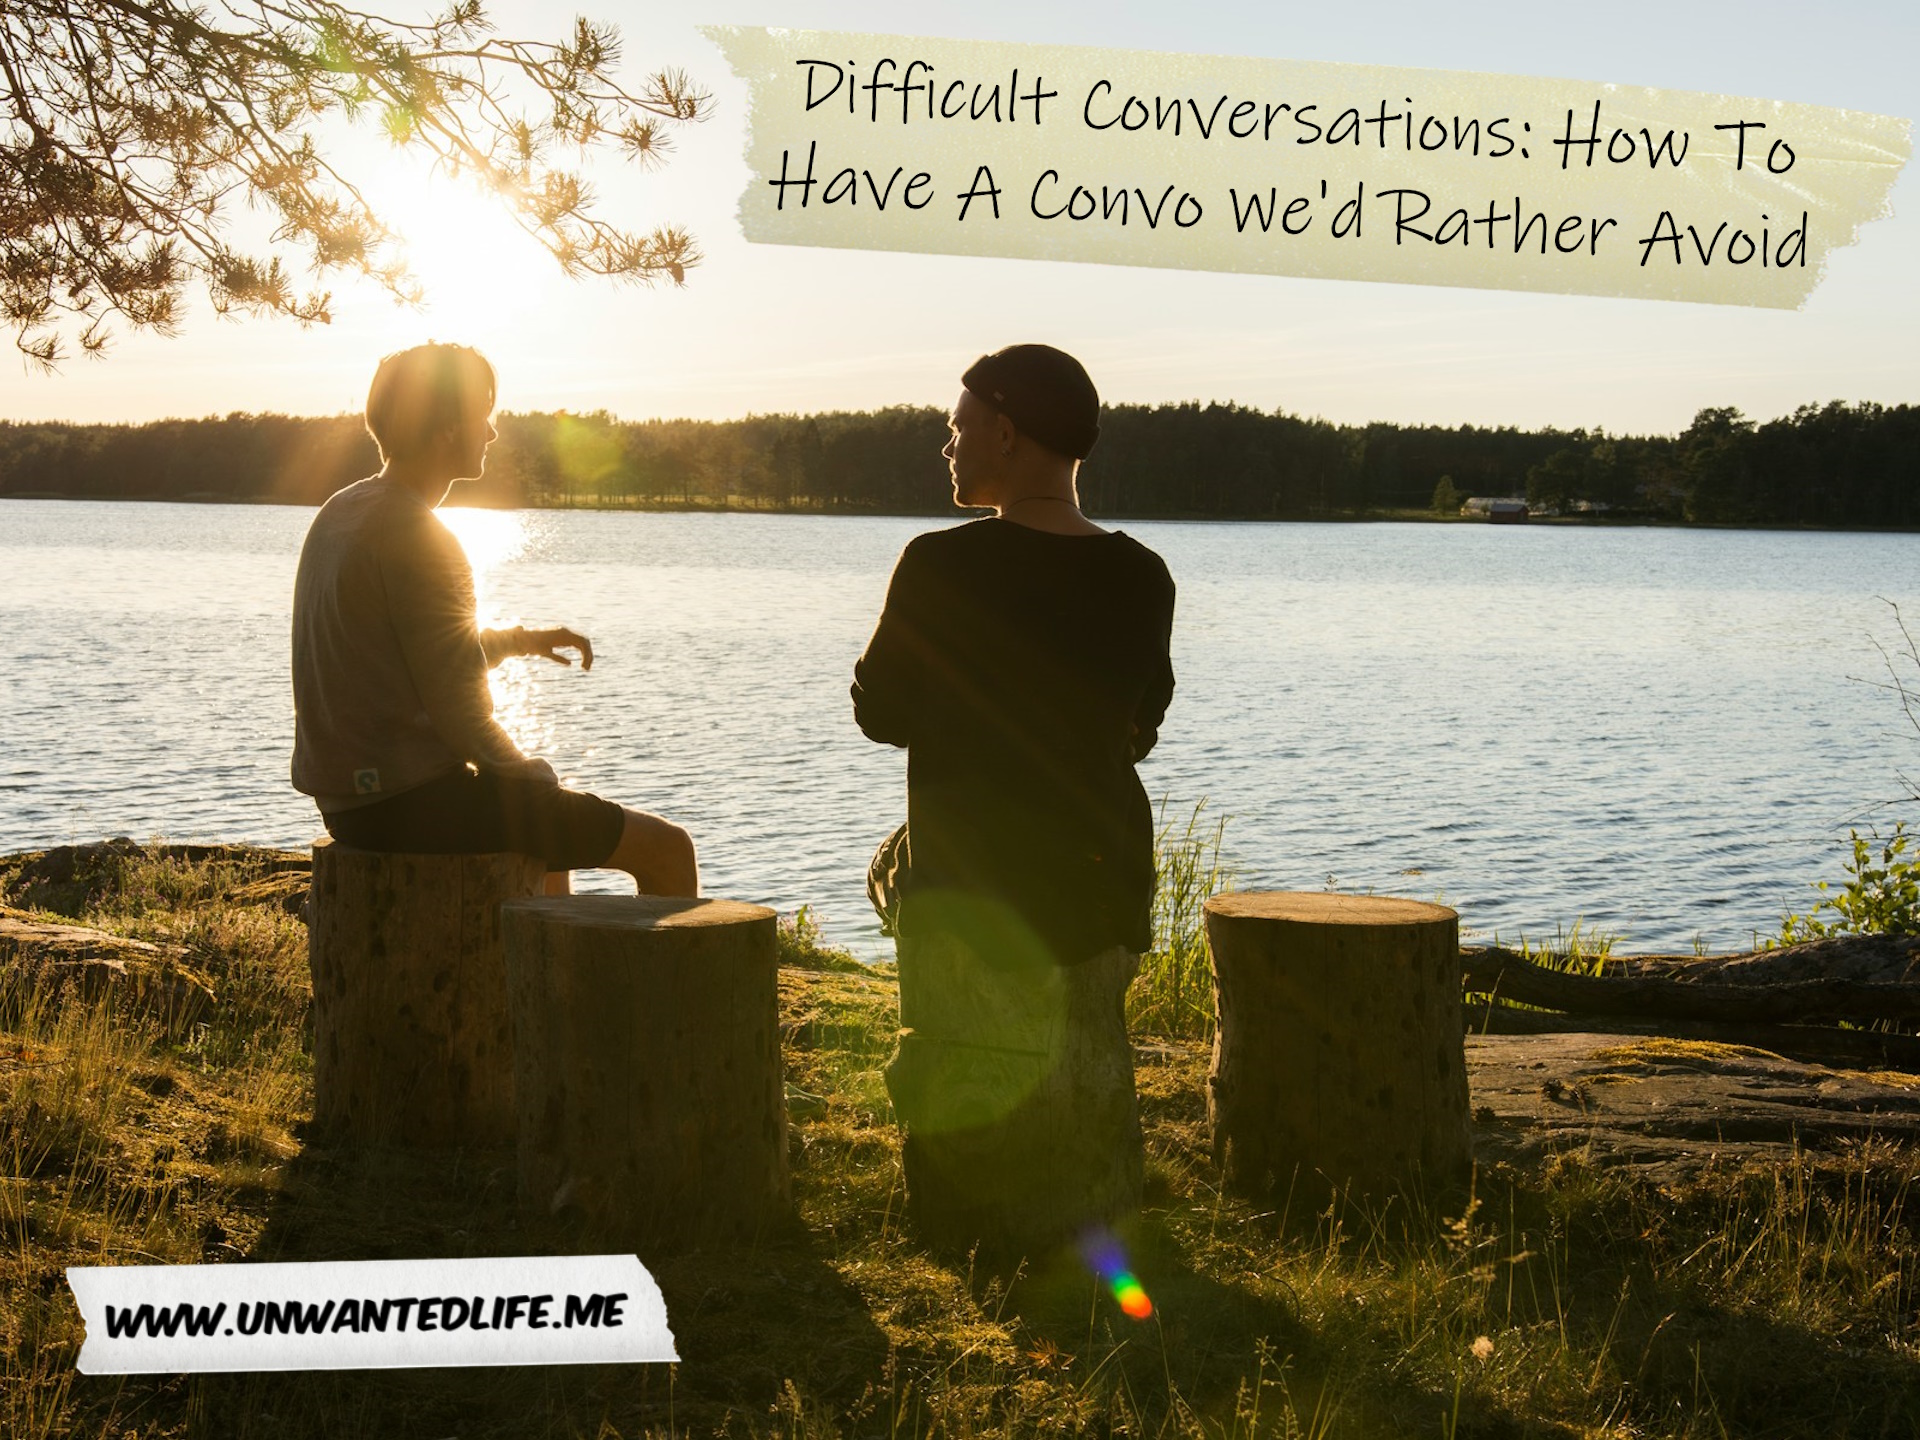 An image of two men sitting and chatting new a river to represent the topic of the article - Difficult Conversations: How To Have A Convo We'd Rather Avoid